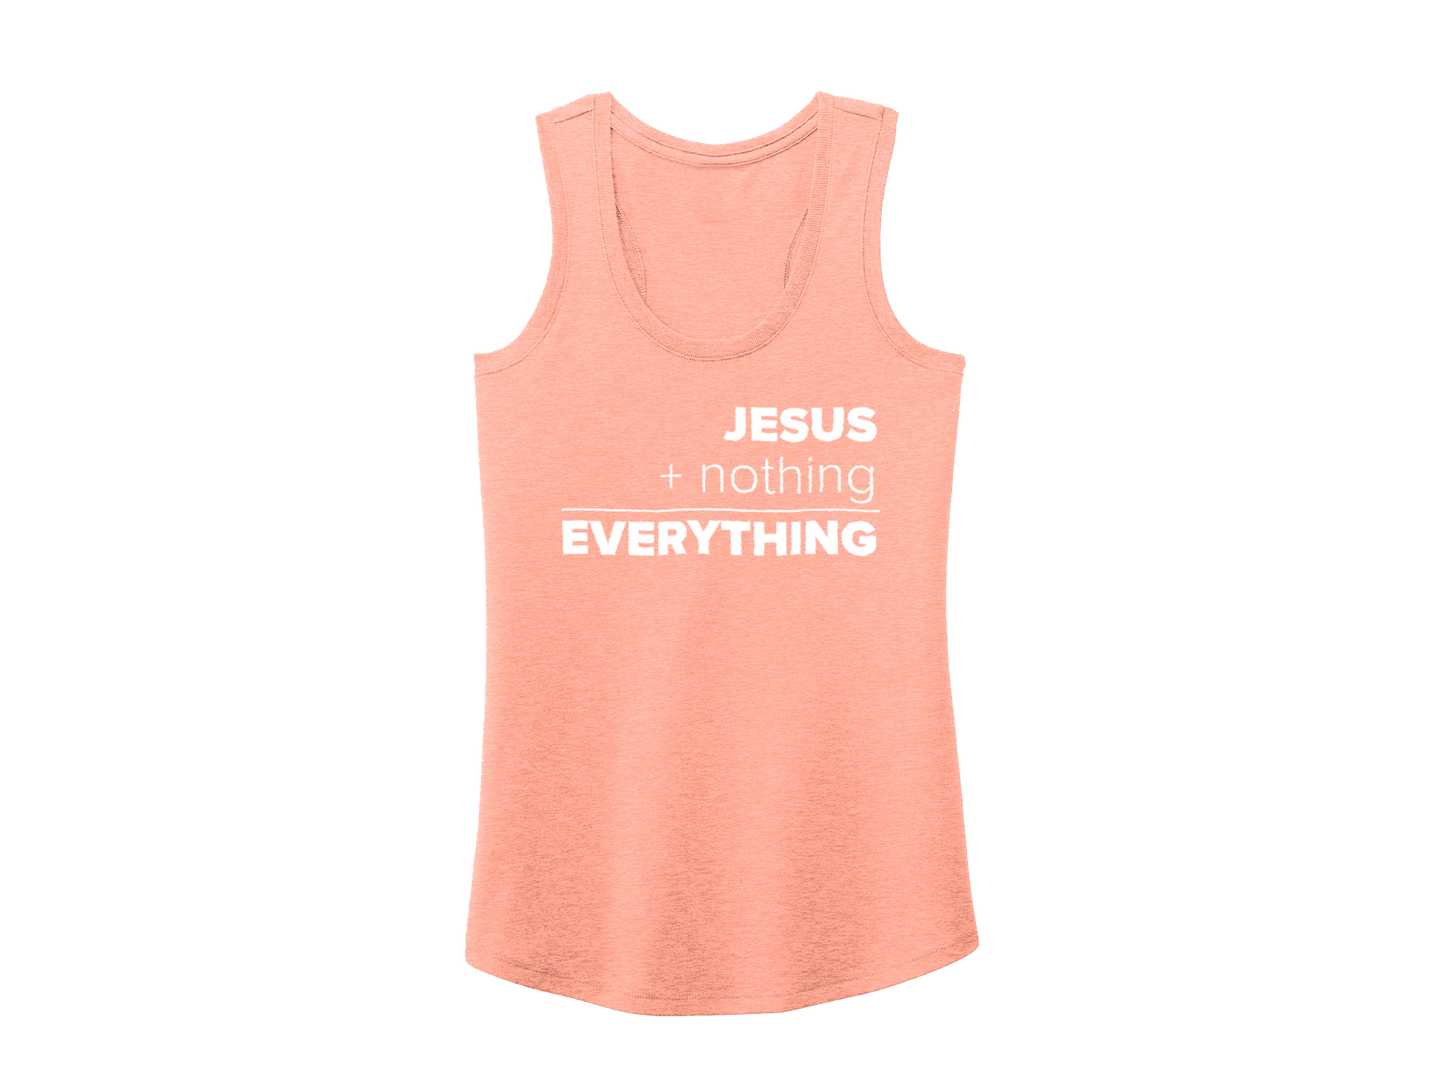 JESUS EQUALS EVERYTHING TANK PEACH - CHRISTIAN CLOTHING